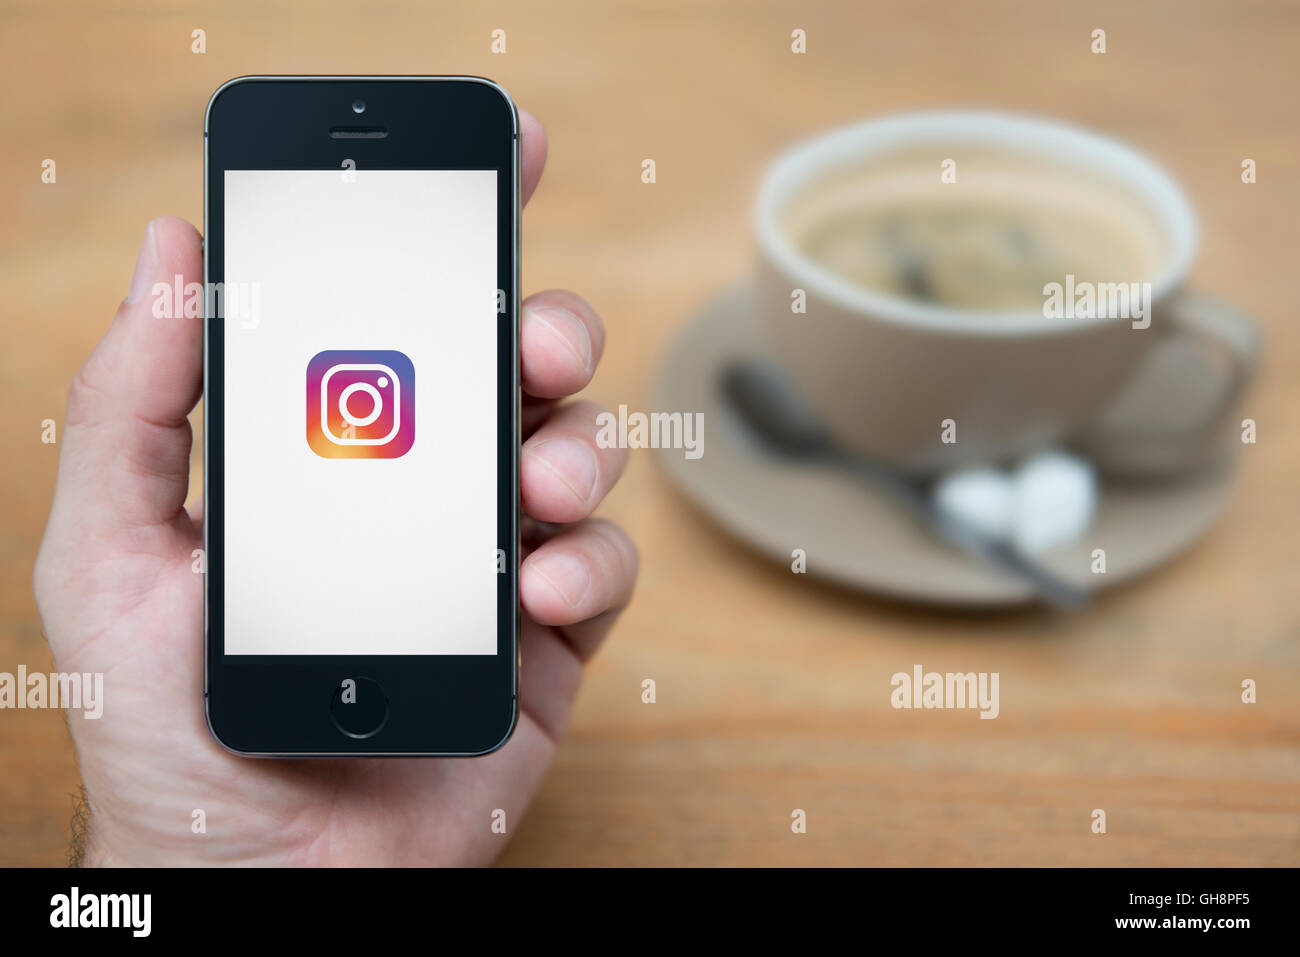 A man looks at his iPhone which displays the Instagram logo, while sat with a cup of coffee (Editorial use only). Stock Photo